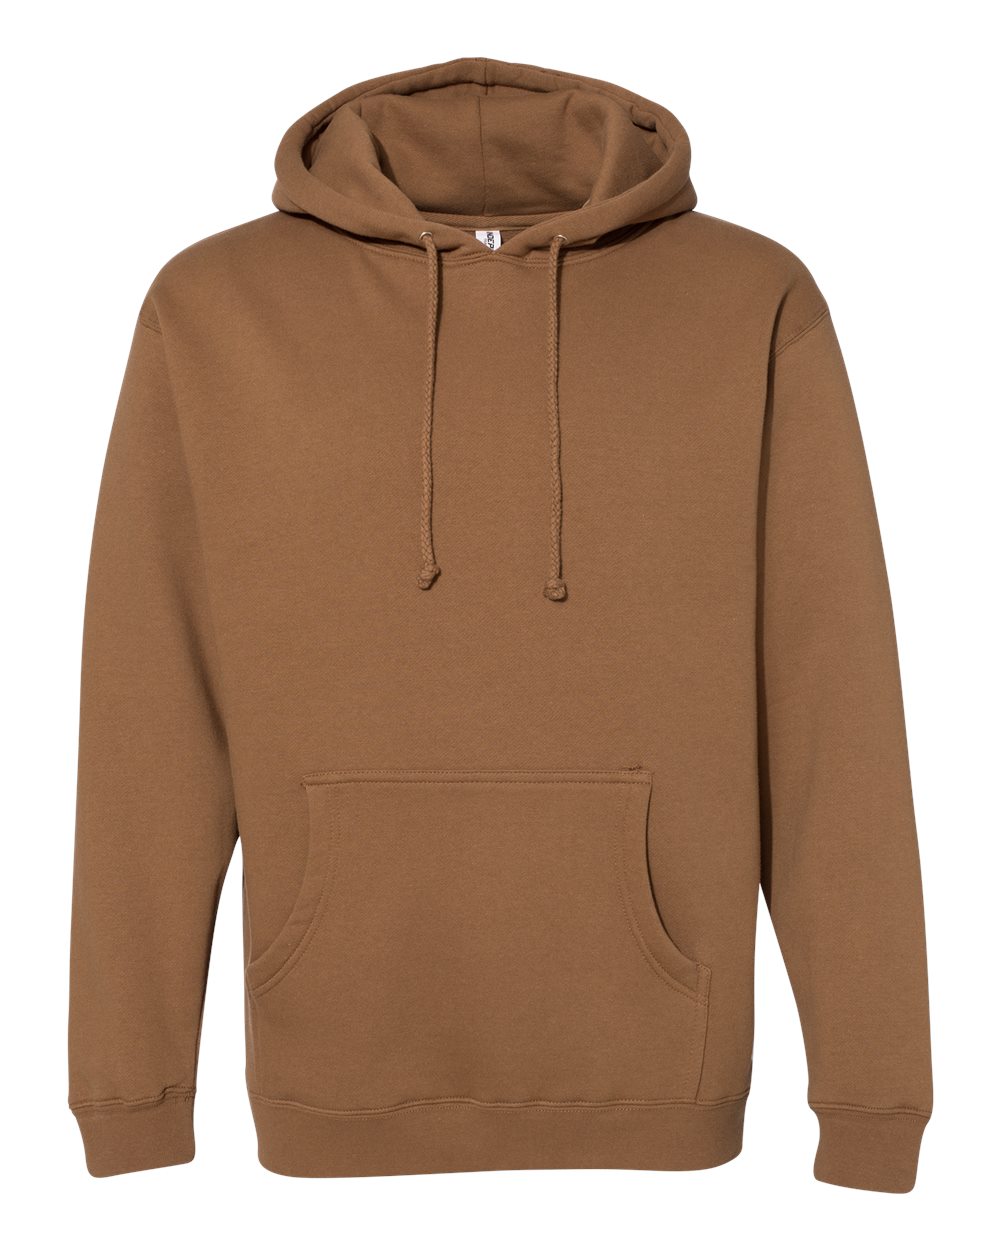 Independent Trading Co. IND4000 Heavyweight Hooded Sweatshirt–Saddle (3XL)